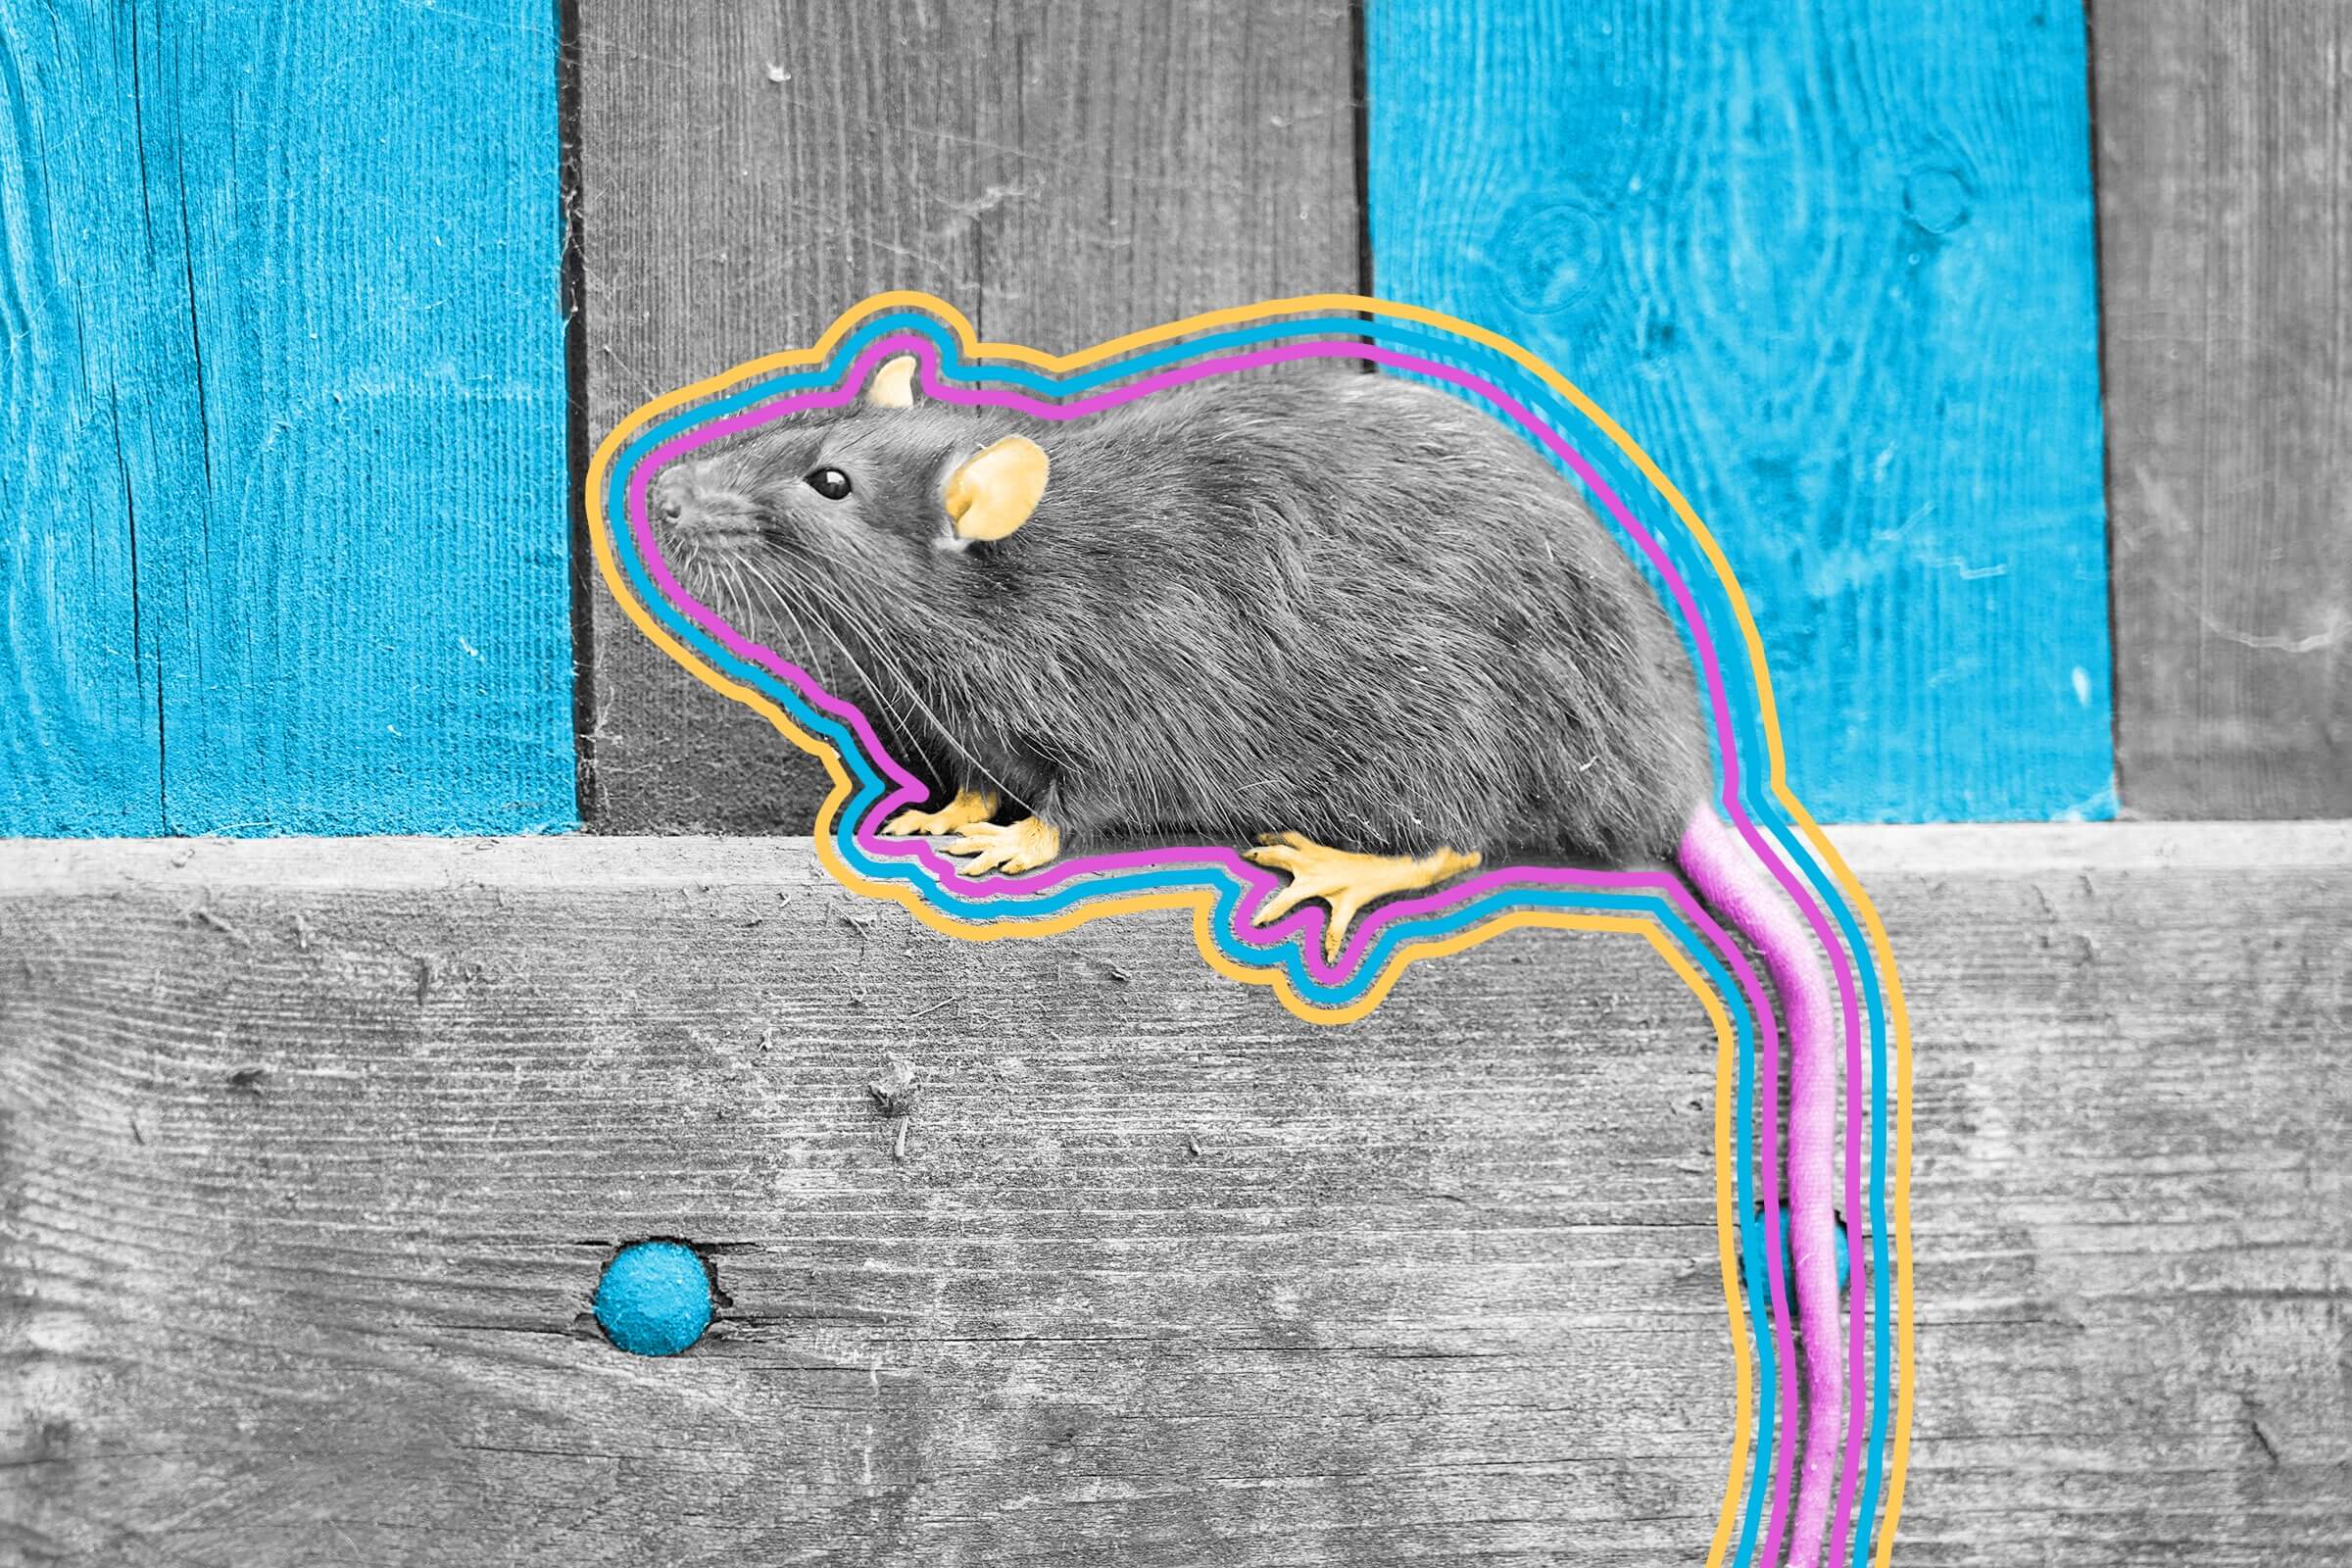 Rats bop their heads in time to music.